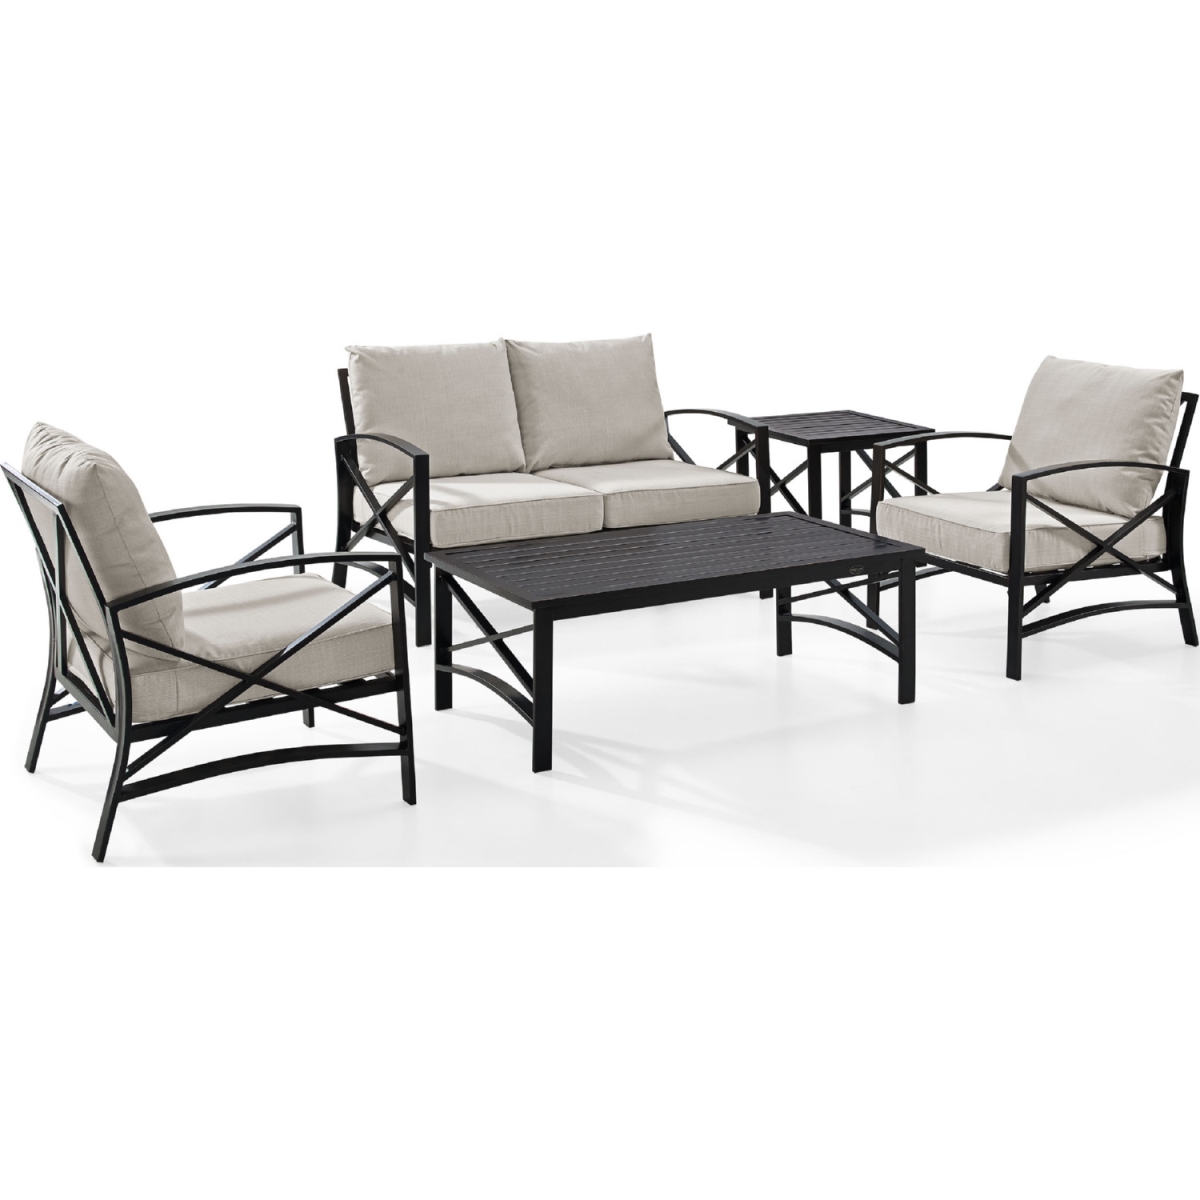 5 Piece Kaplan Outdoor Seating Set With Oatmeal Cushion - Loveseat, Two Chairs, Coffee Table, Side Table